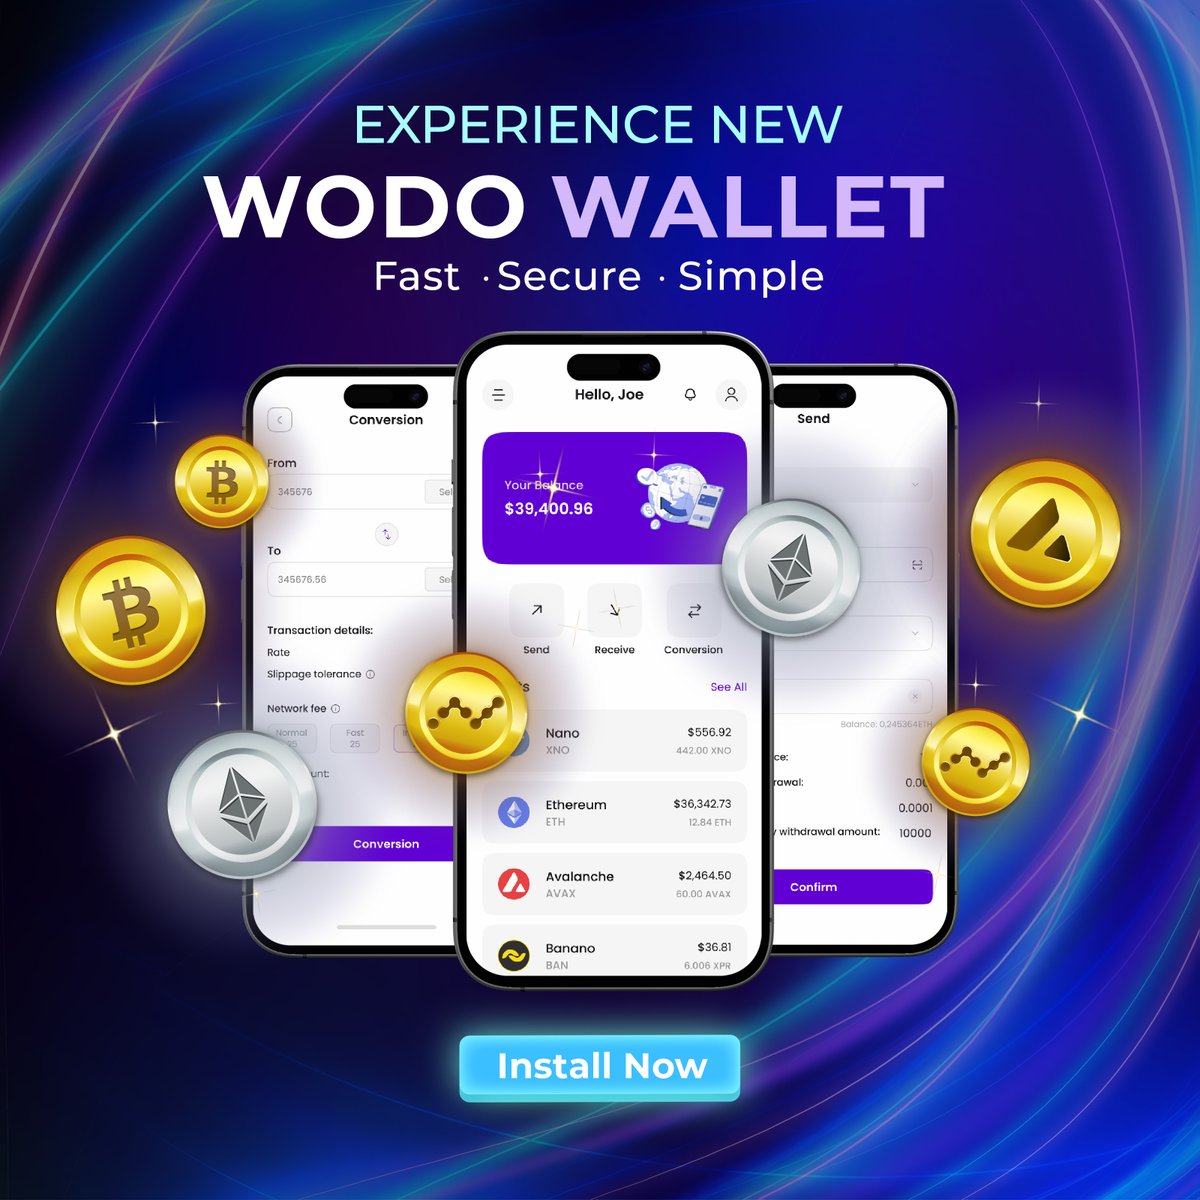 Store, transfer, exchange your #cryptoassets 🟣

Get a faster and more secure experience with Wodo Wallet ⤵️

wallet.wodo.io

#WodoNetwork #WodoWallet #CryptoNews #CryptoCurrency #WodoFinance #Definews